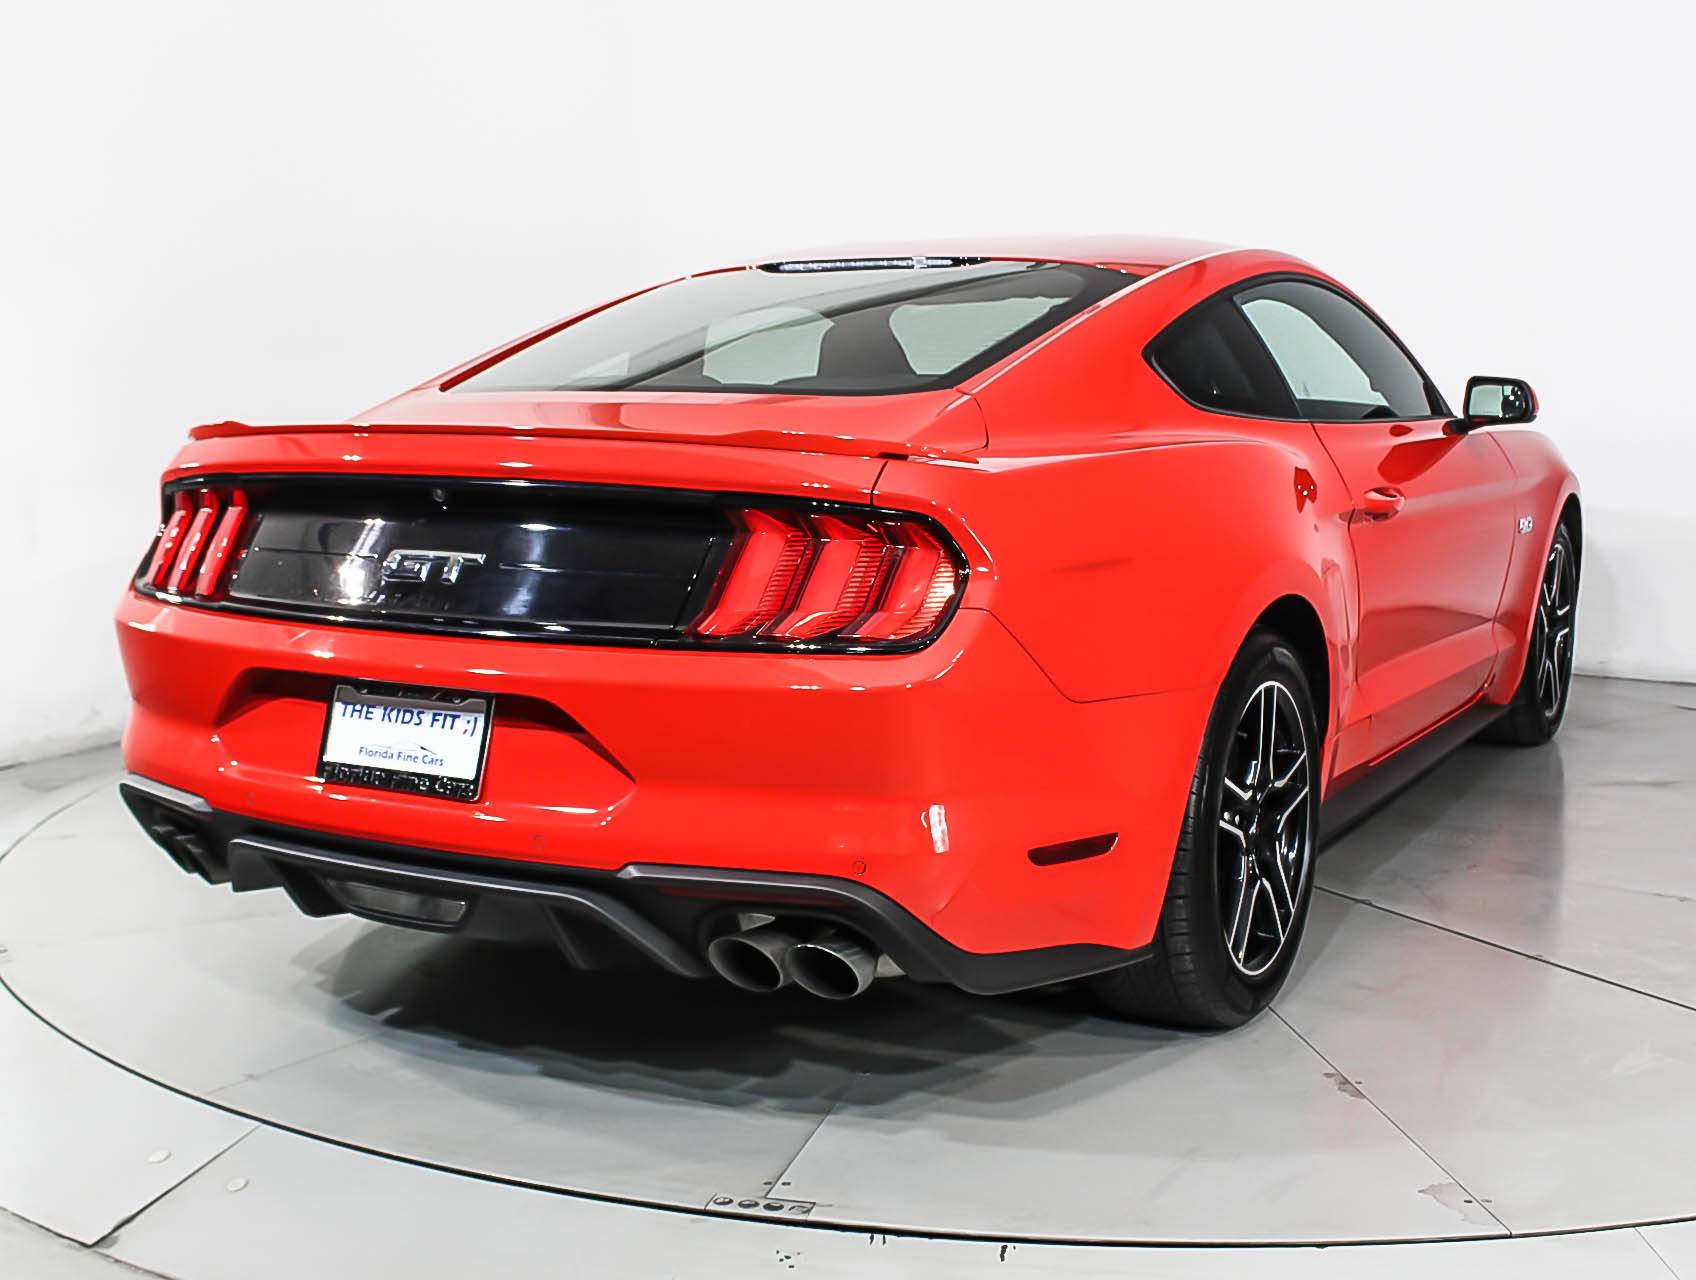 Florida Fine Cars - Used FORD MUSTANG 2018 MIAMI GT